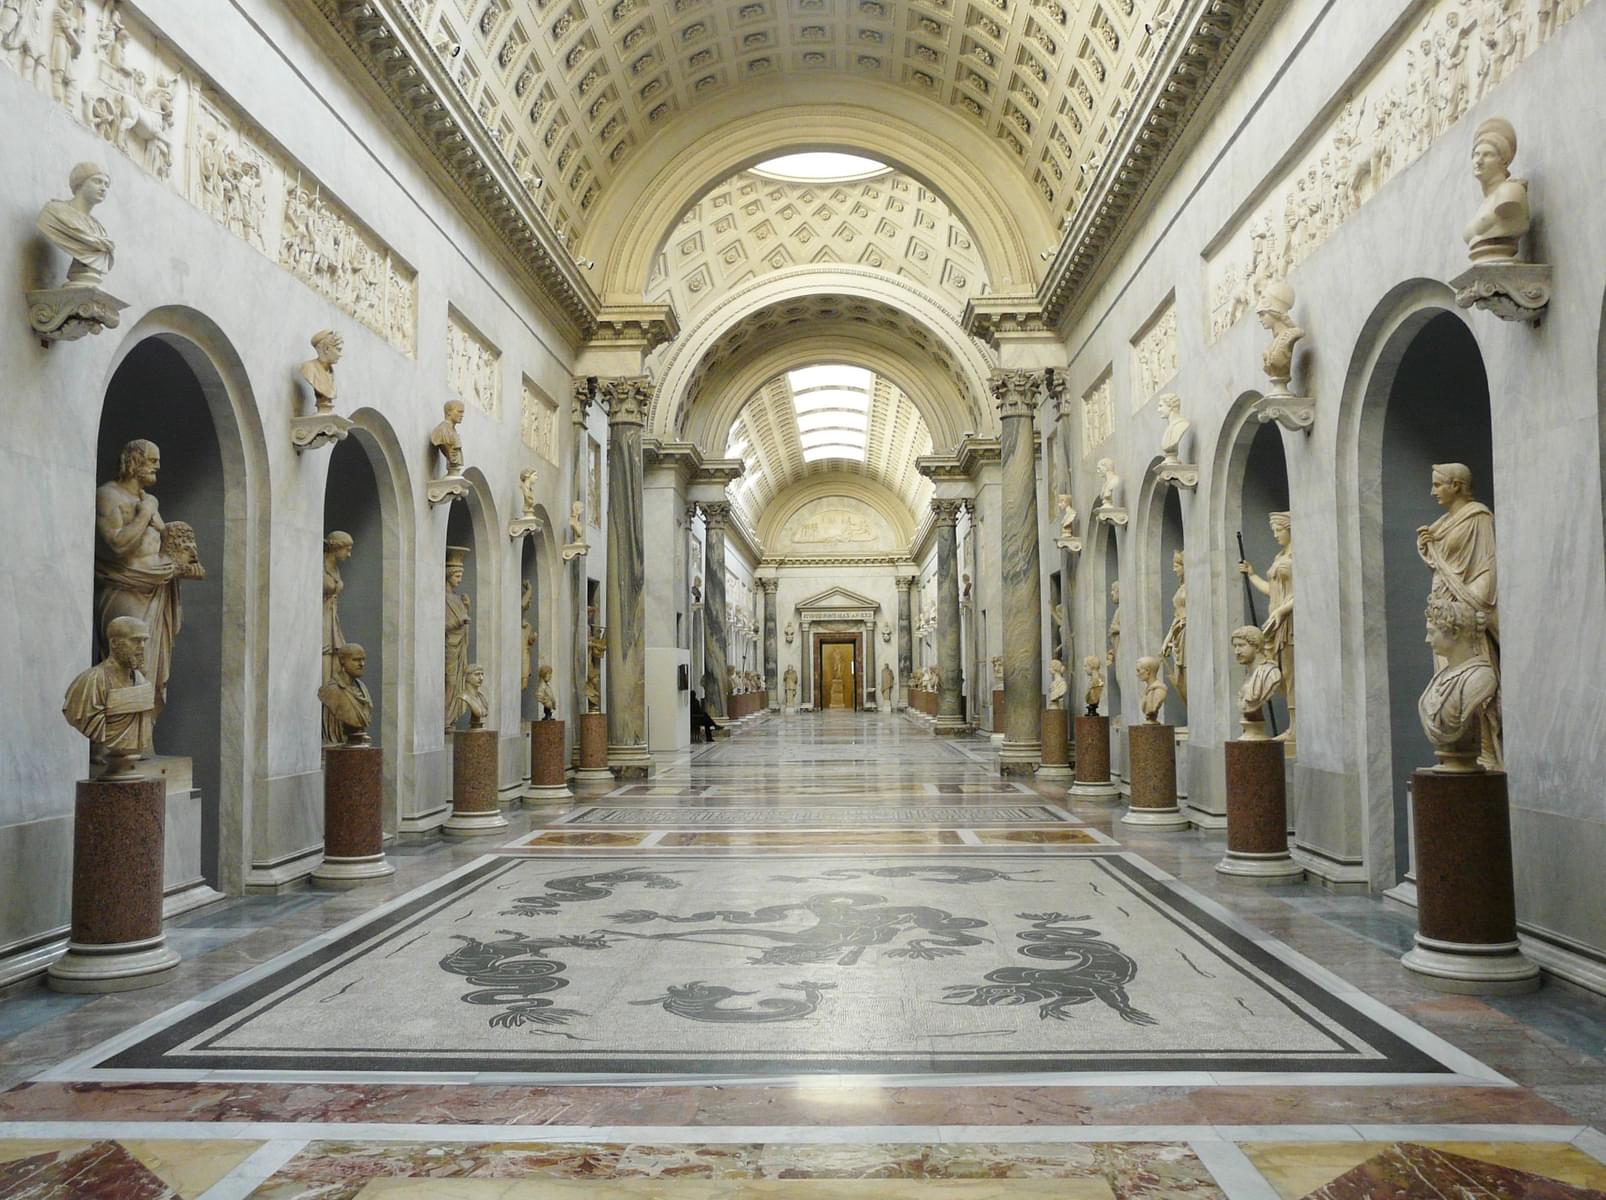 The Raphael Rooms